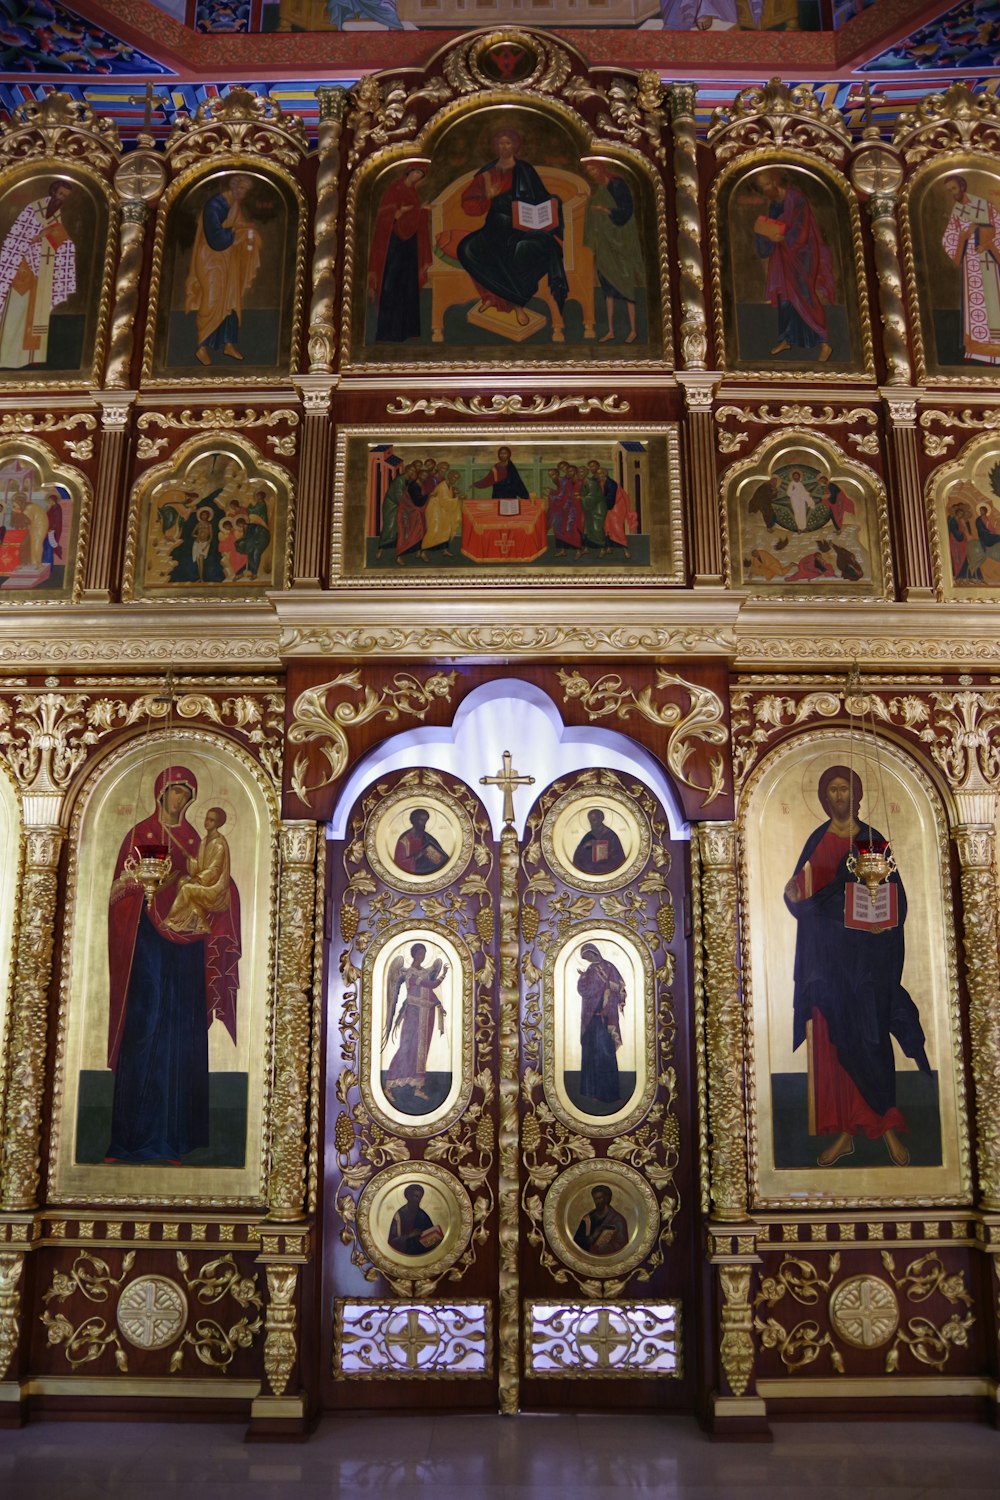 an ornately decorated church with paintings on the walls